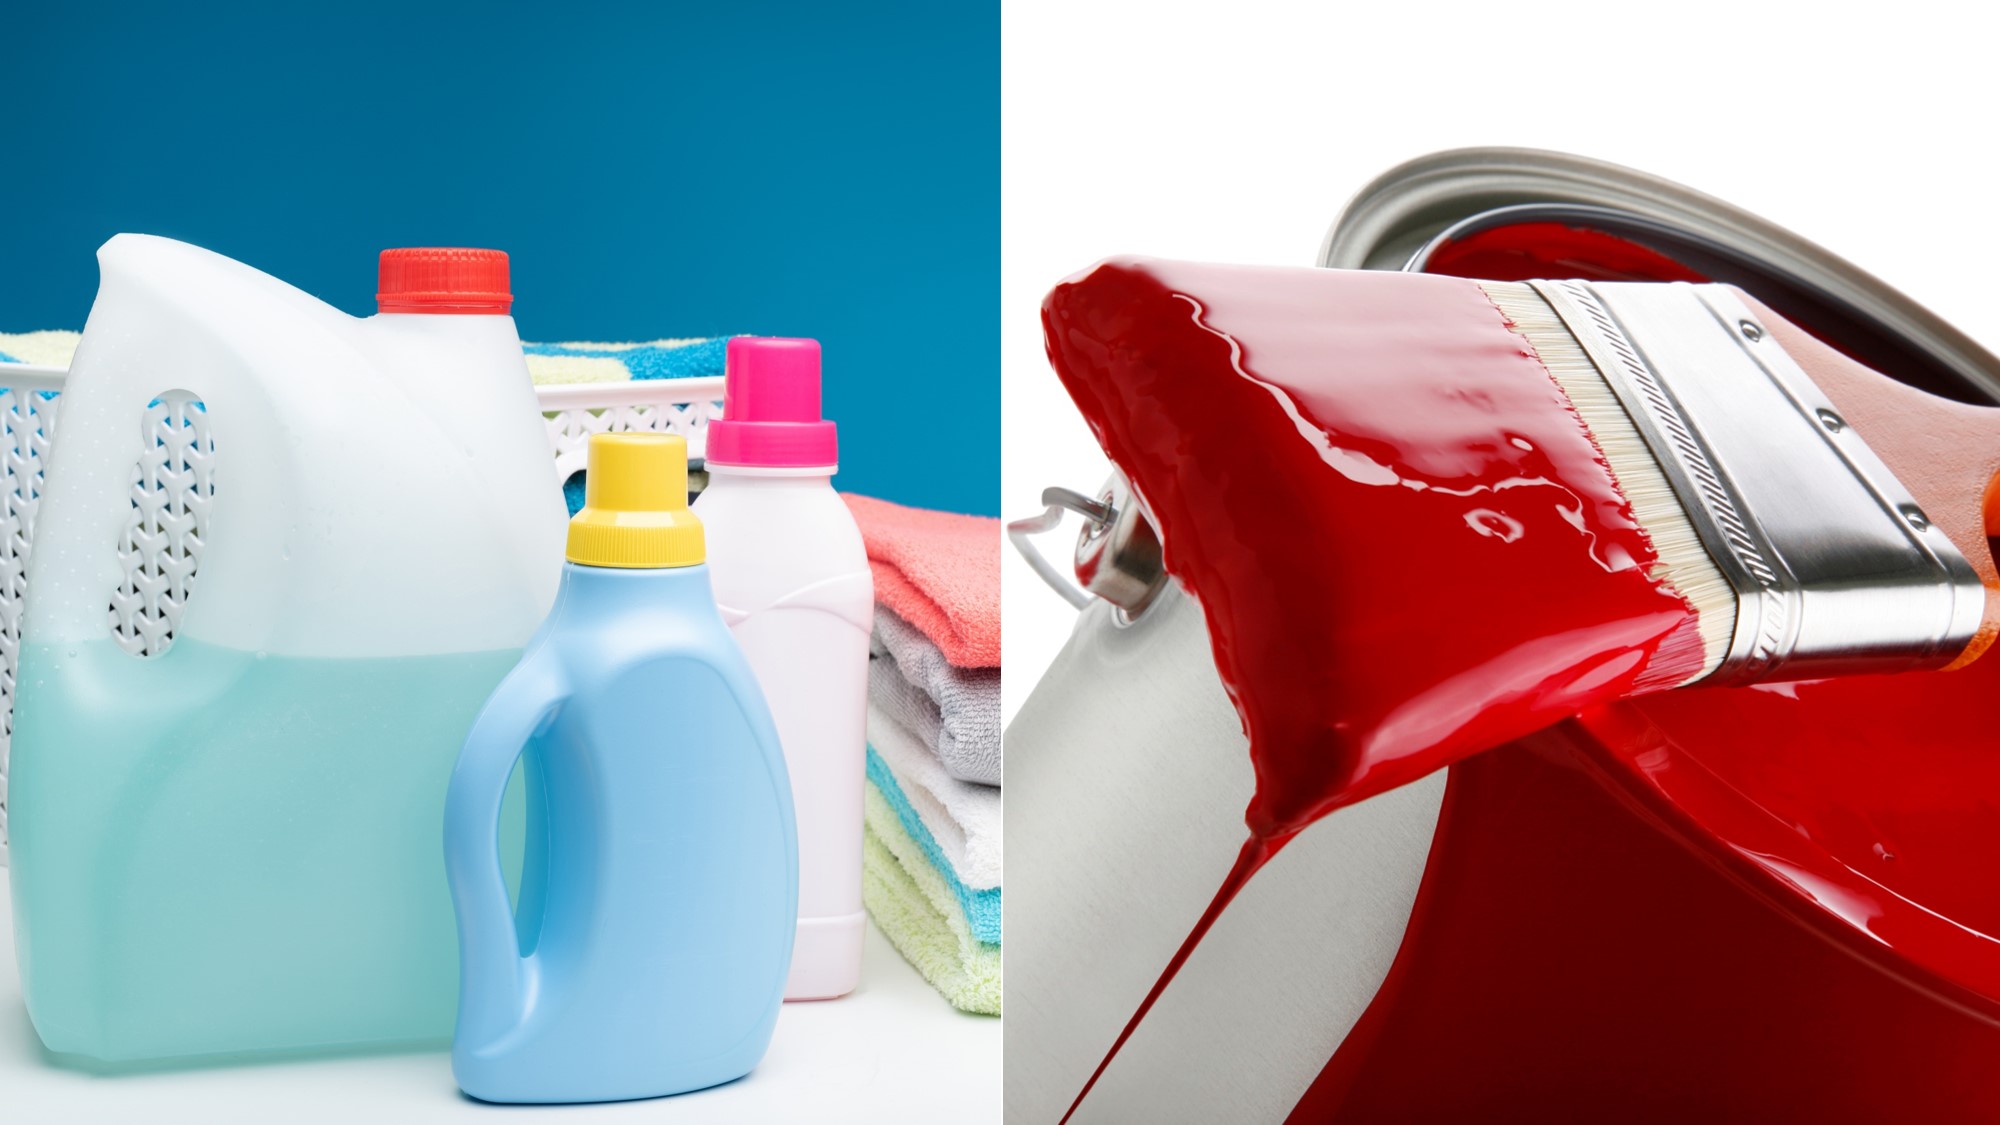 MIT (Methylisothiazolinone) substitutes as preservatives in detergents and paints